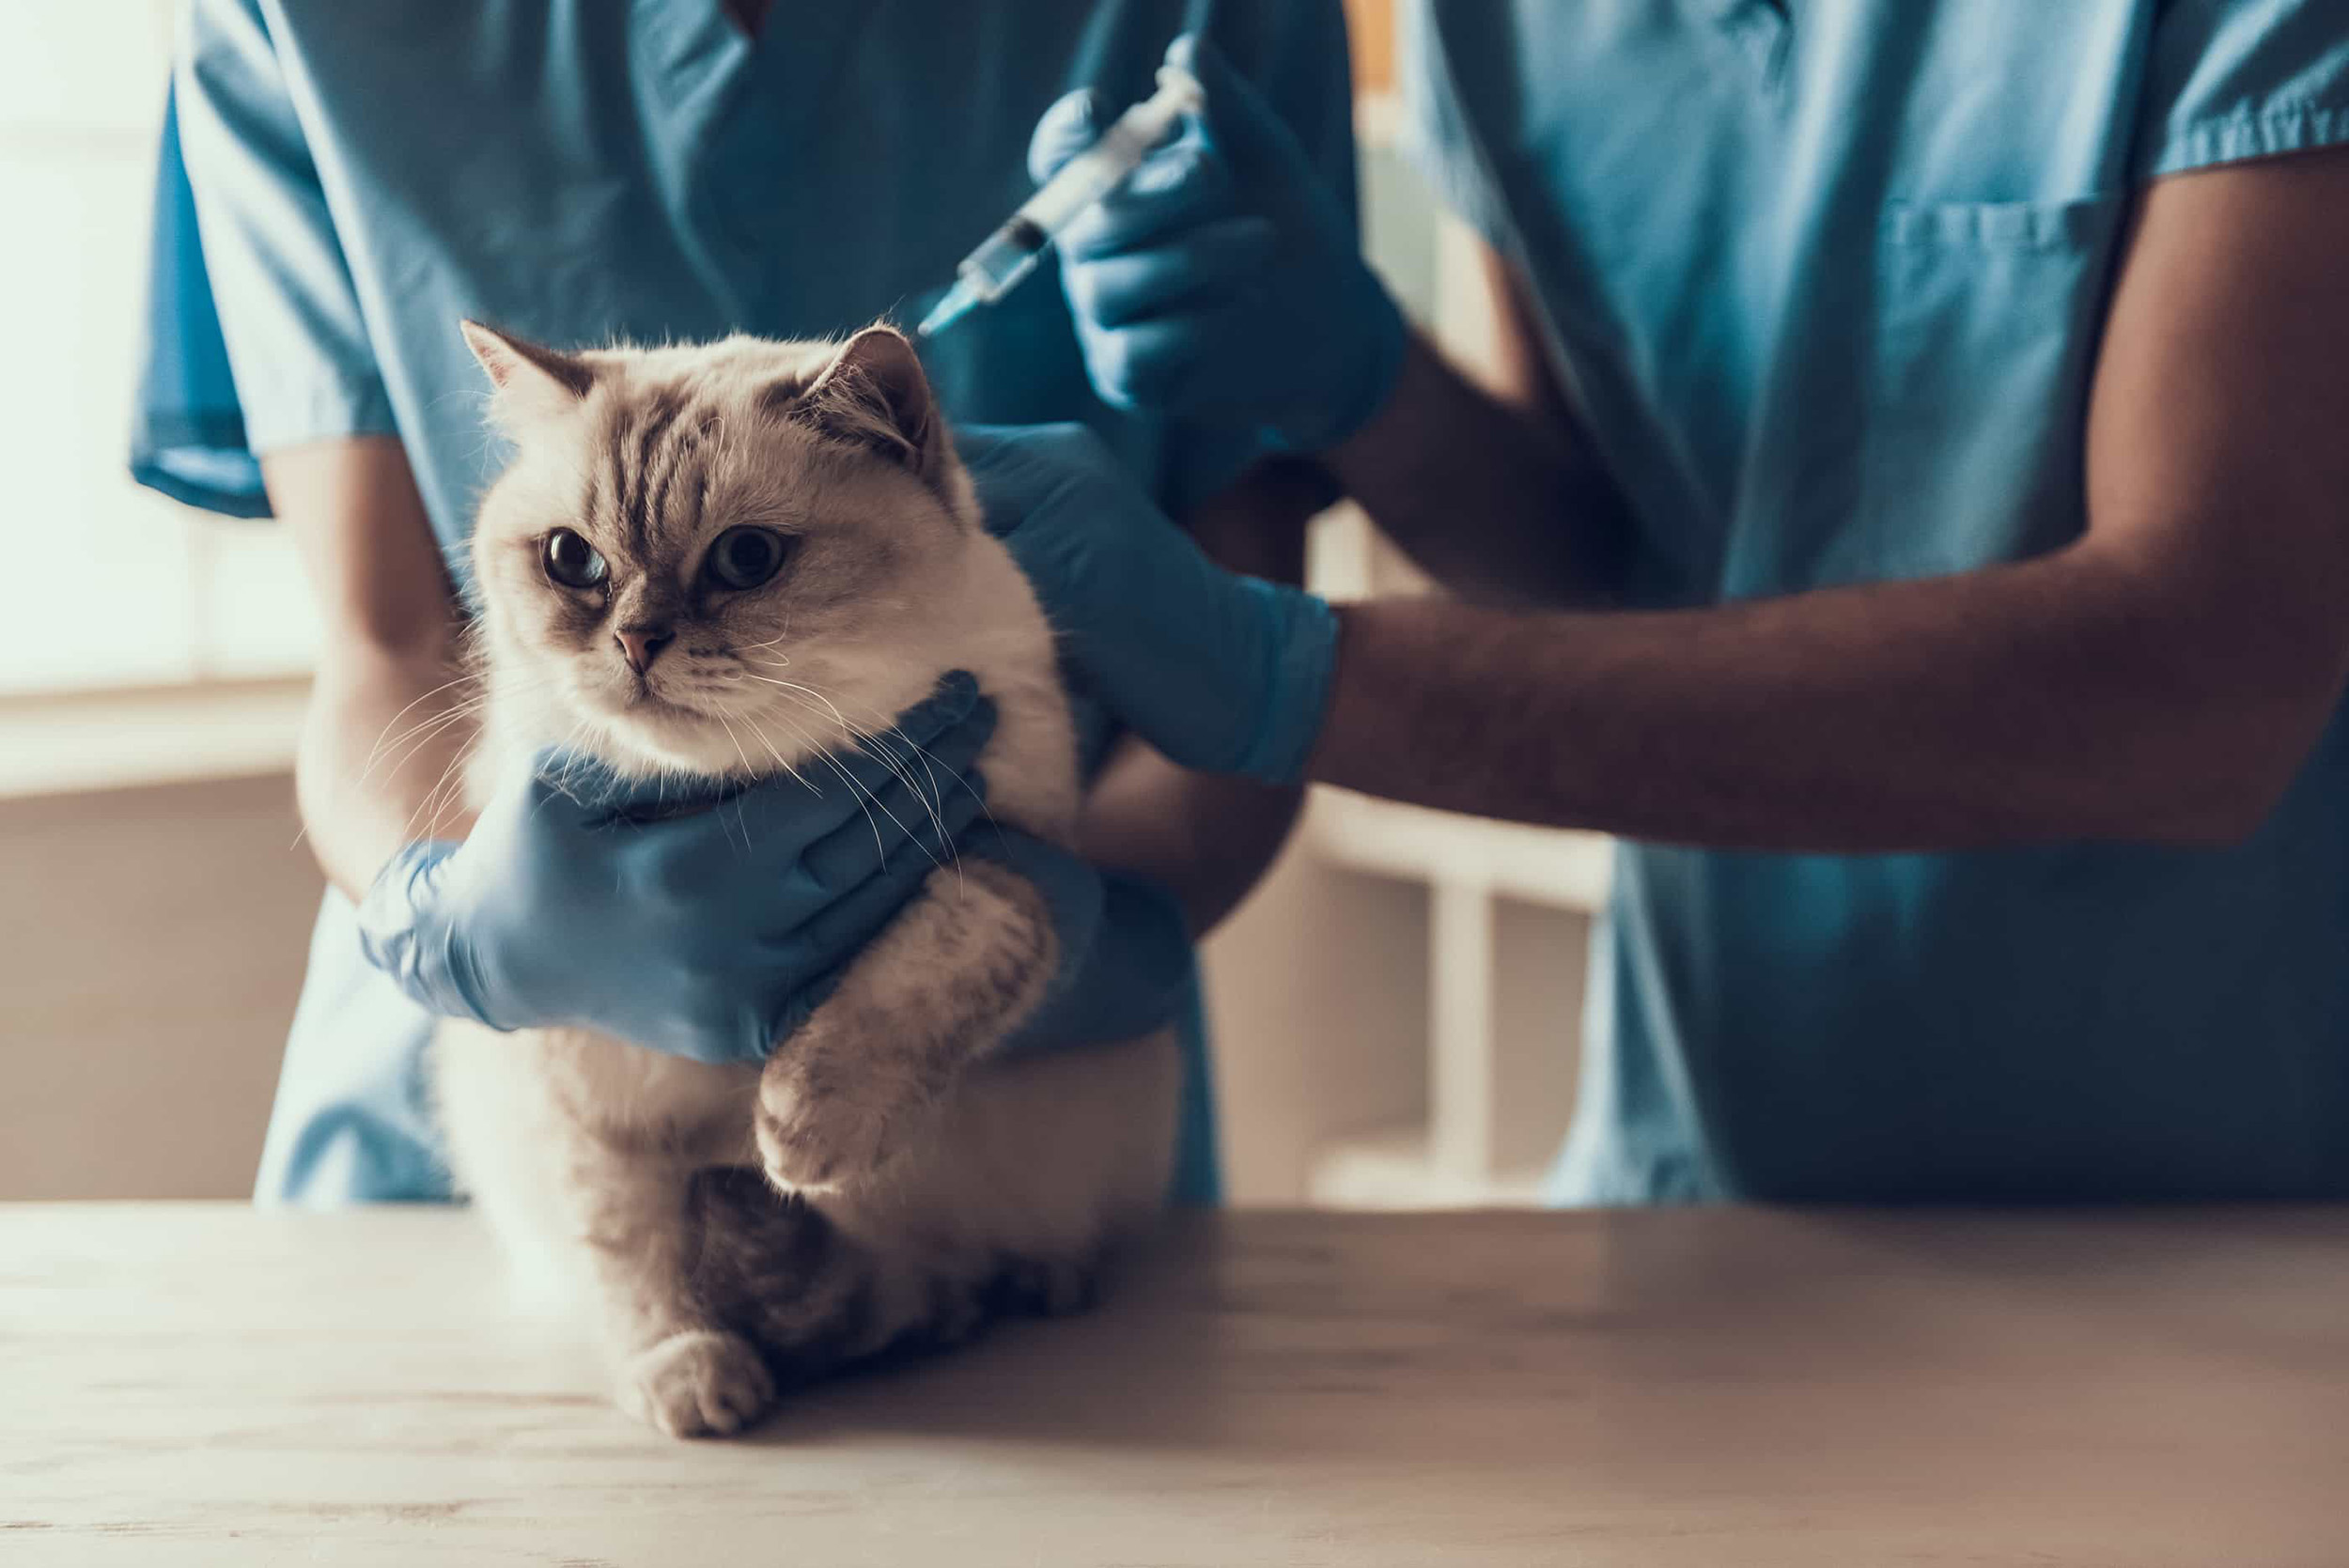 A cute grey cat being examined by a veterinarian on a house call